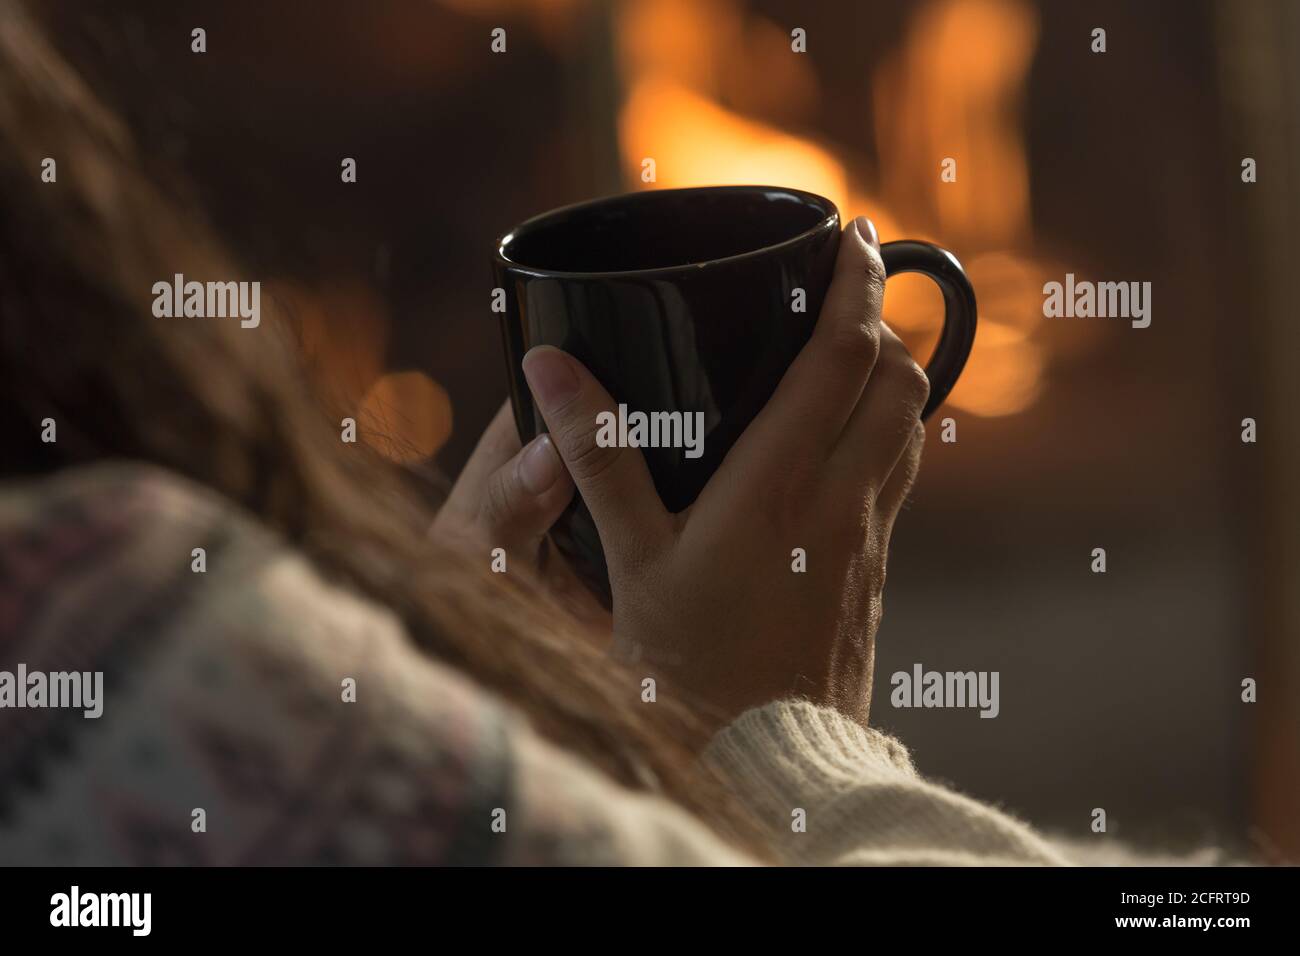 black mug in hands with lit fireplace background Stock Photo